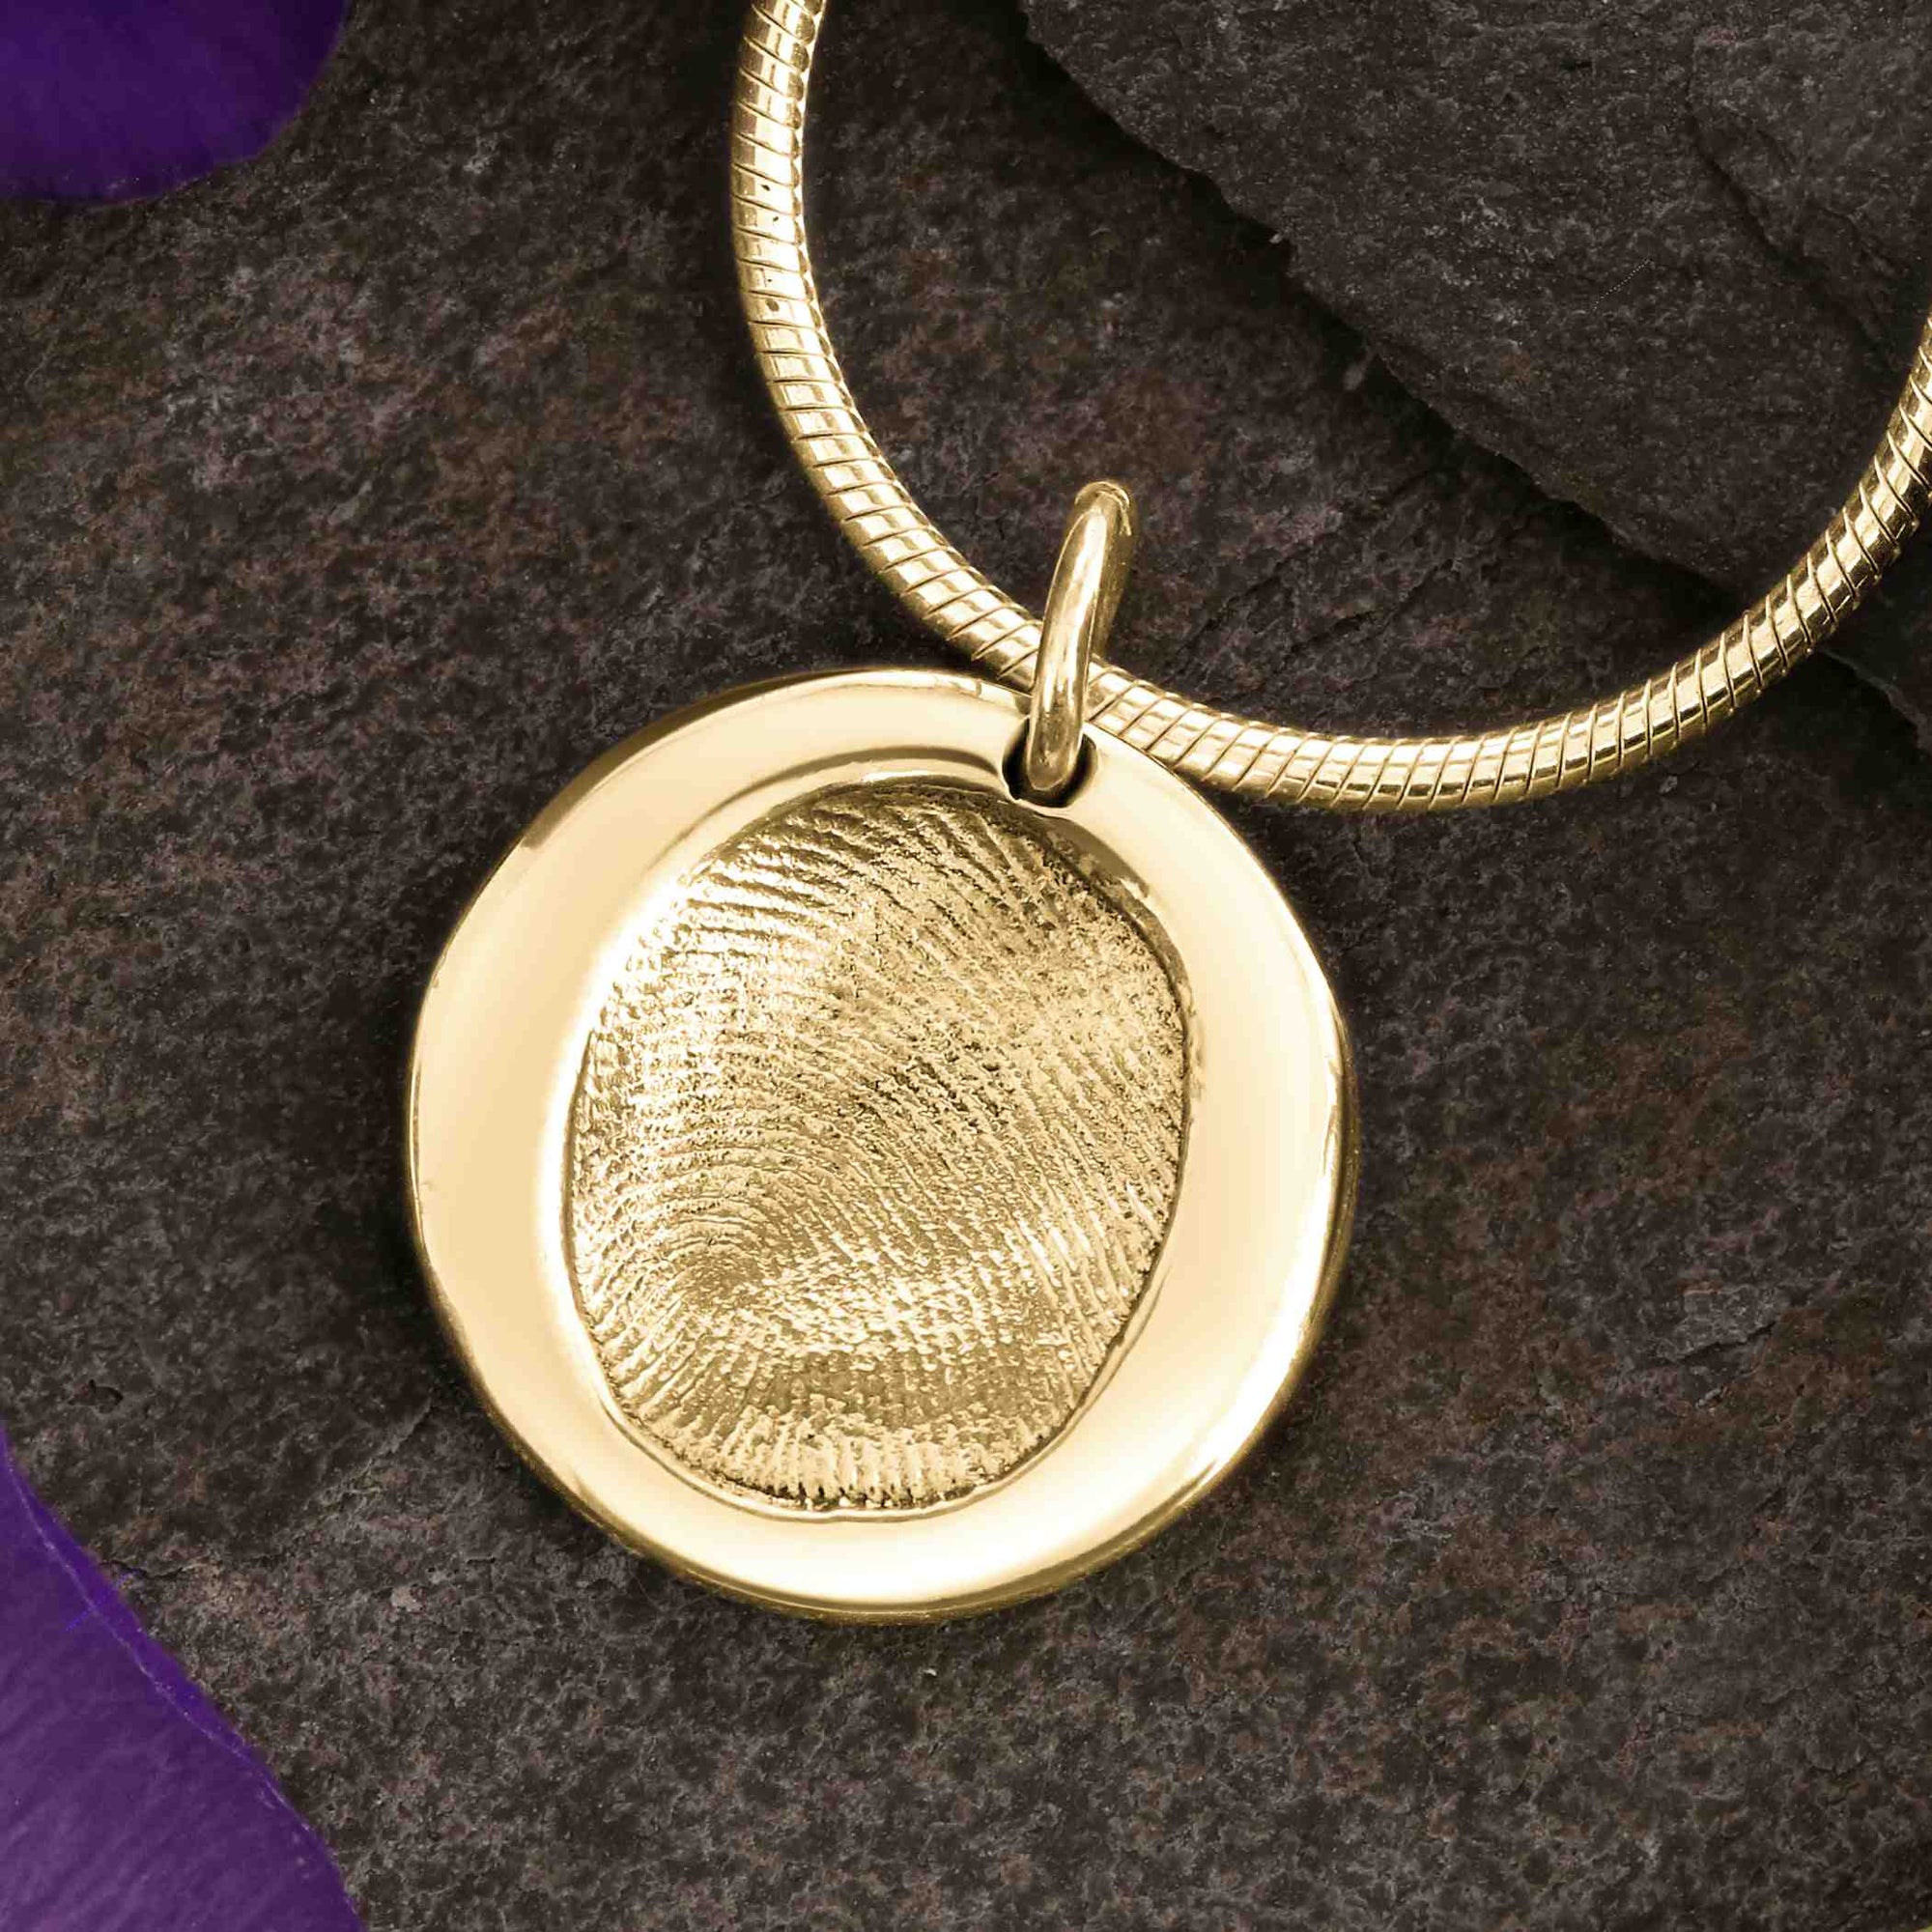 GOLD SNAKE CHAIN with Petite Disc Fingerprint Necklace